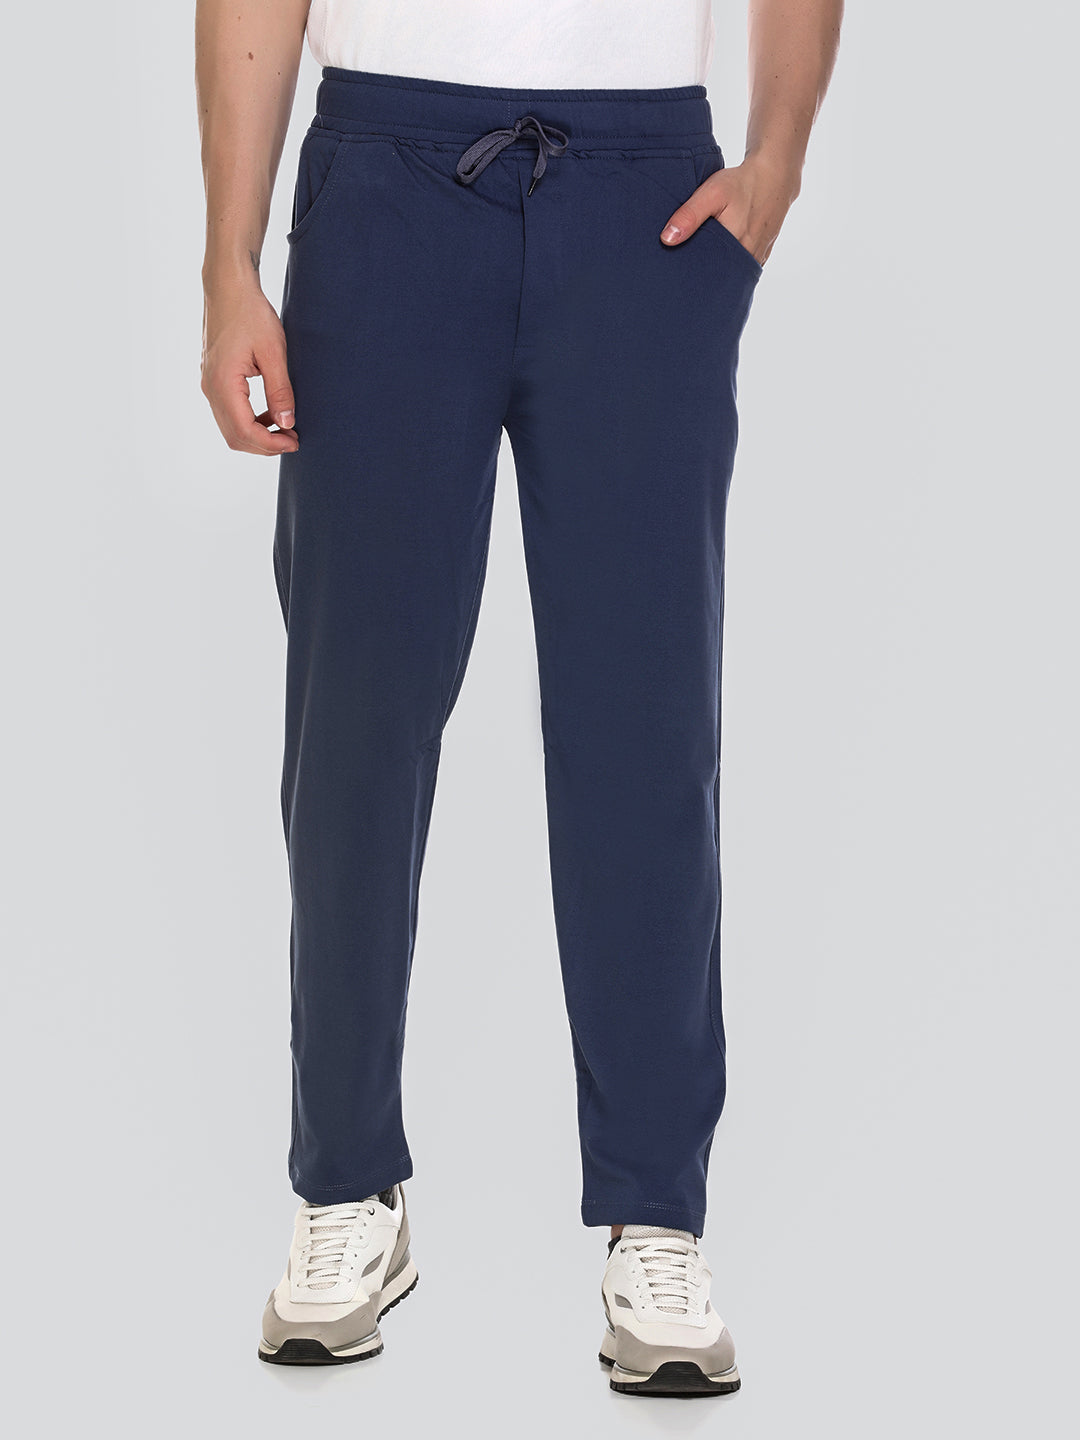 Jinxer Regular Fit Sports Lowers For Men - Oxford Blue